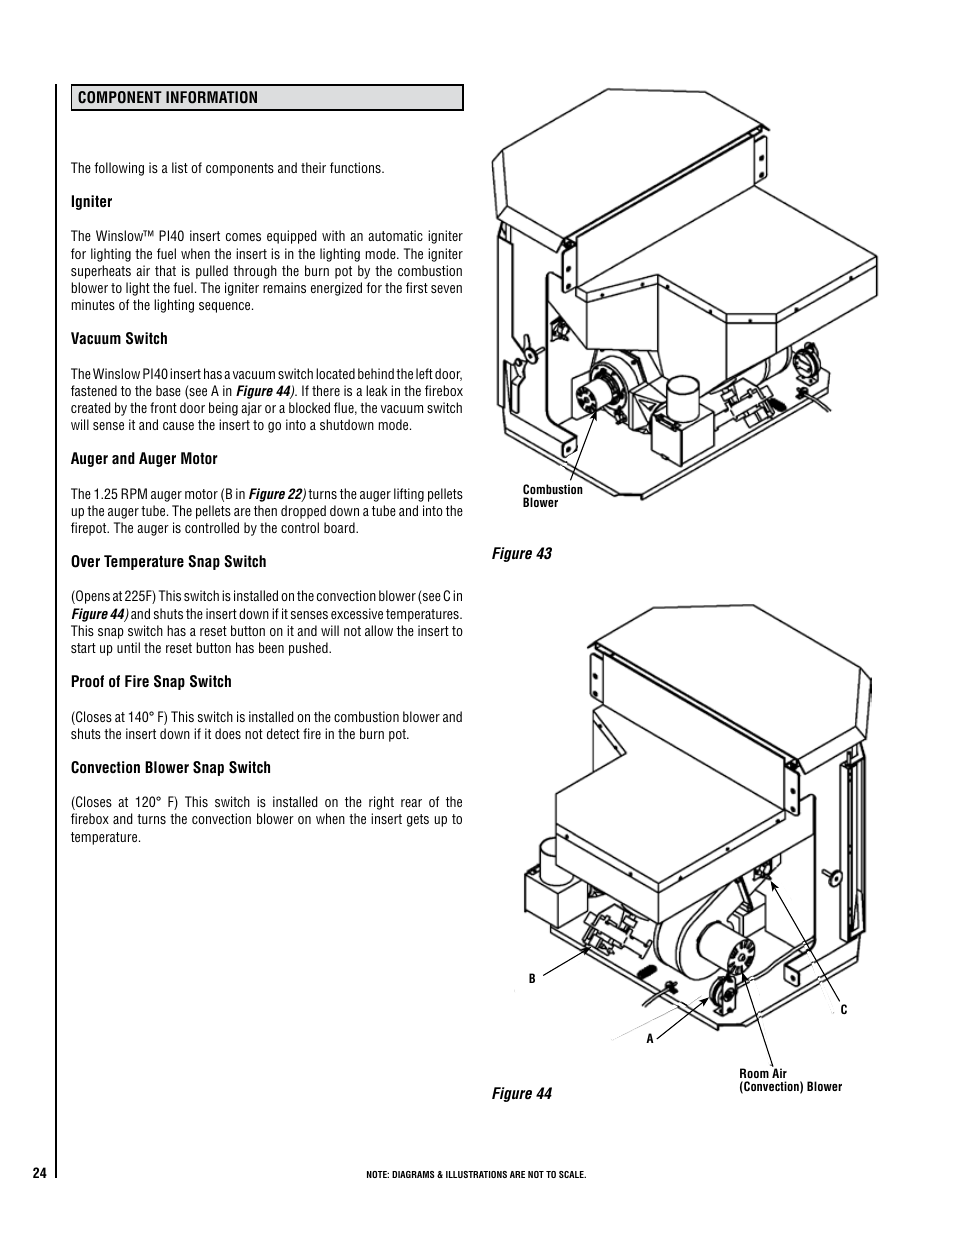 Maytag WINSLOW PI40 User Manual | Page 24 / 36